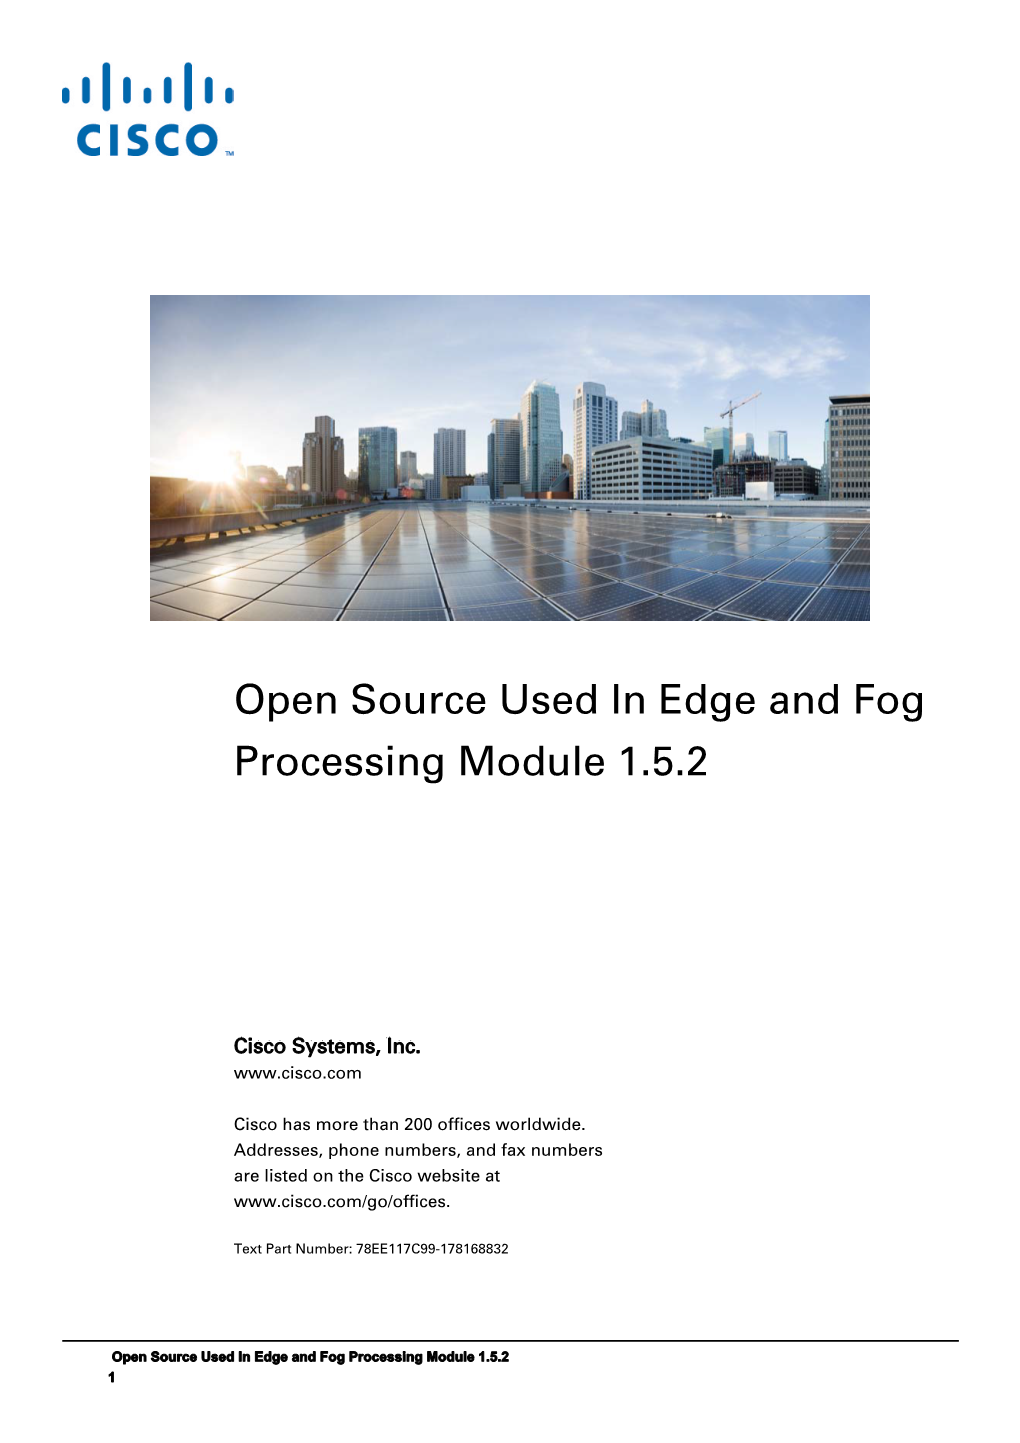 Open Source Used in Edge and Fog Processing Module 1.5.2